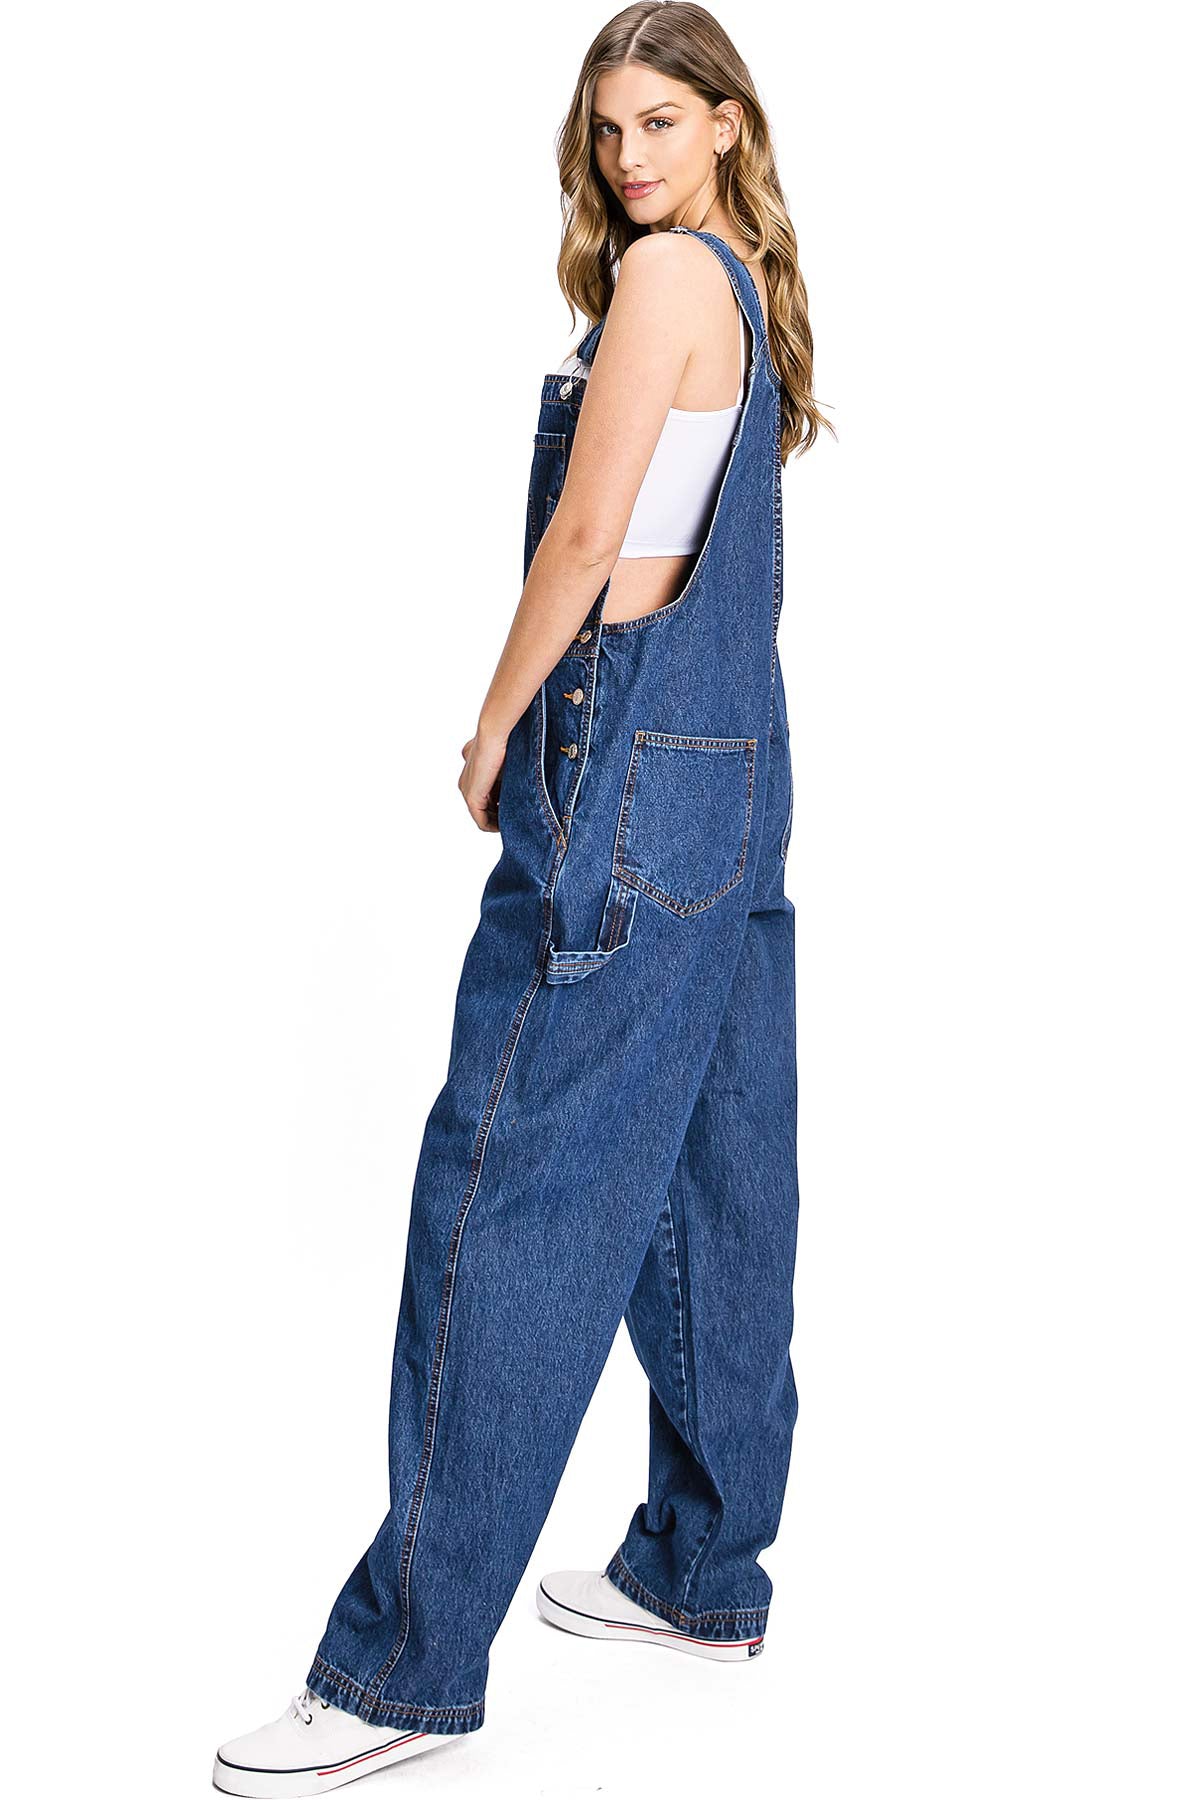 Plus Size Denim Overalls White Jeans Women Casual Cargo Pants Suspenders  Trousers Hip Hop Jeans Girls Female Clothing - Jeans - AliExpress